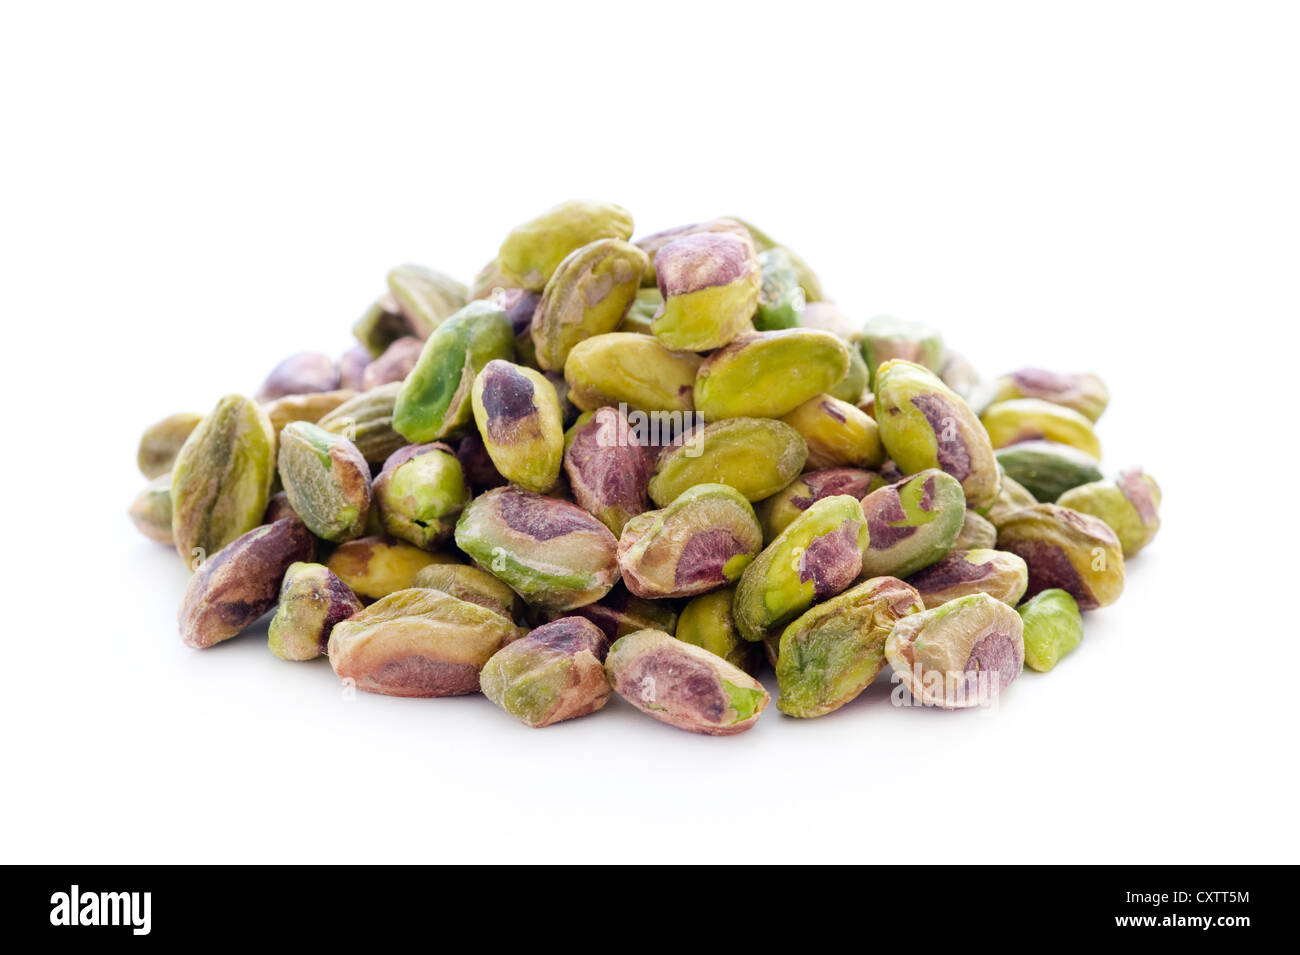 shelled whole pistachio nuts isolated on a white background Stock Photo